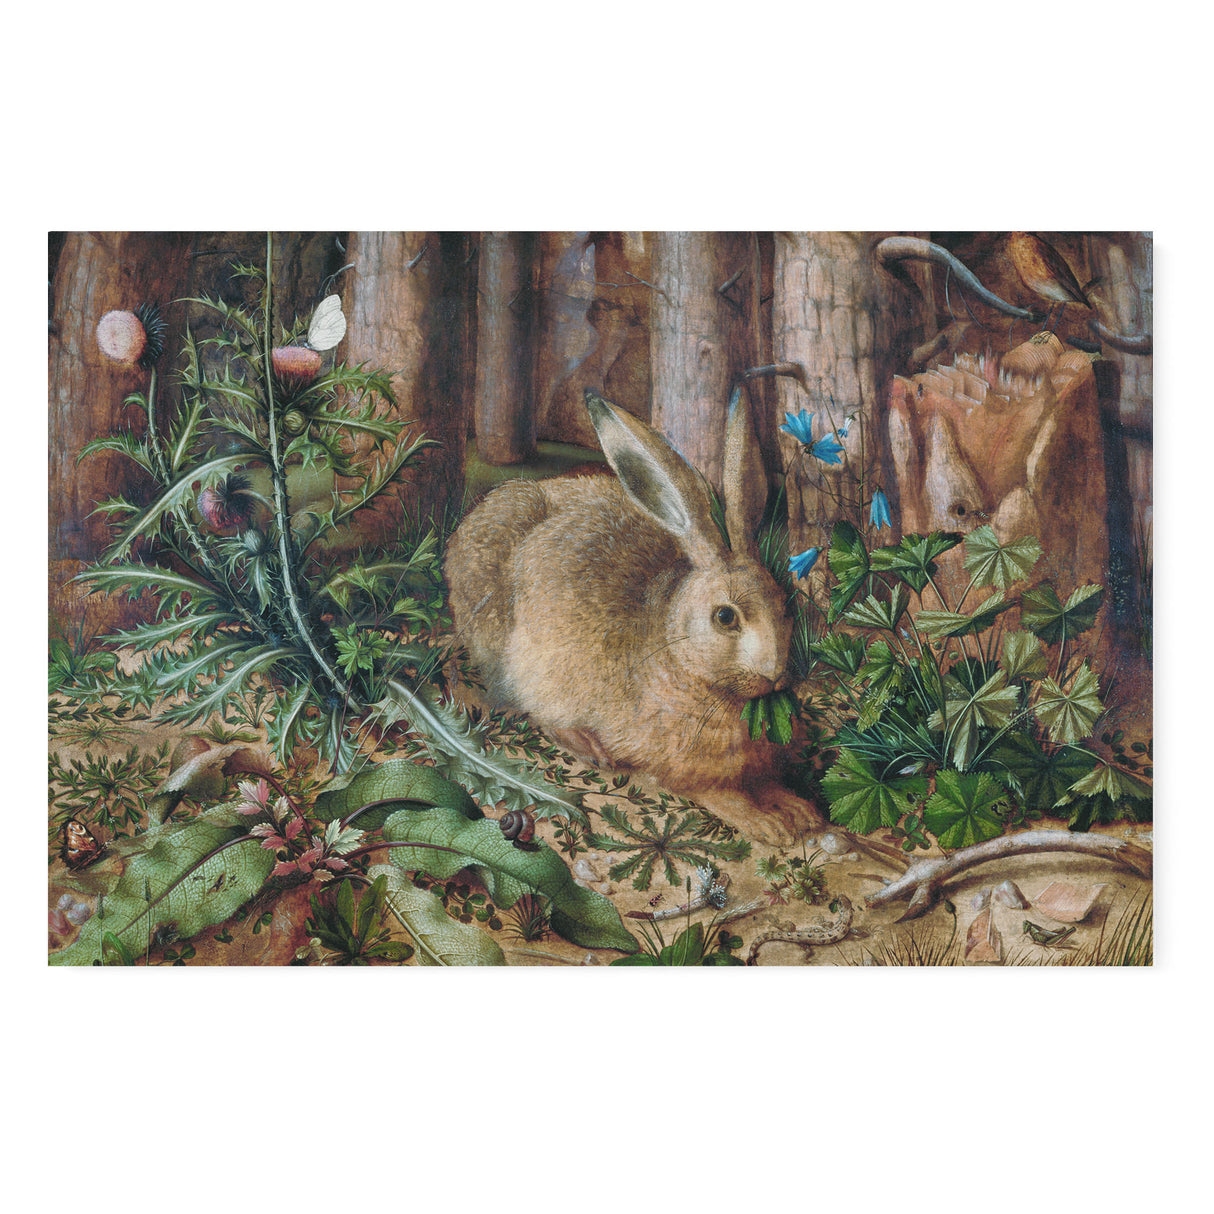 "A Hare in the Forest" Wall Art Canvas Print by Hans Hofmann (1585) Canvas Wall Art Sckribbles 48x32  